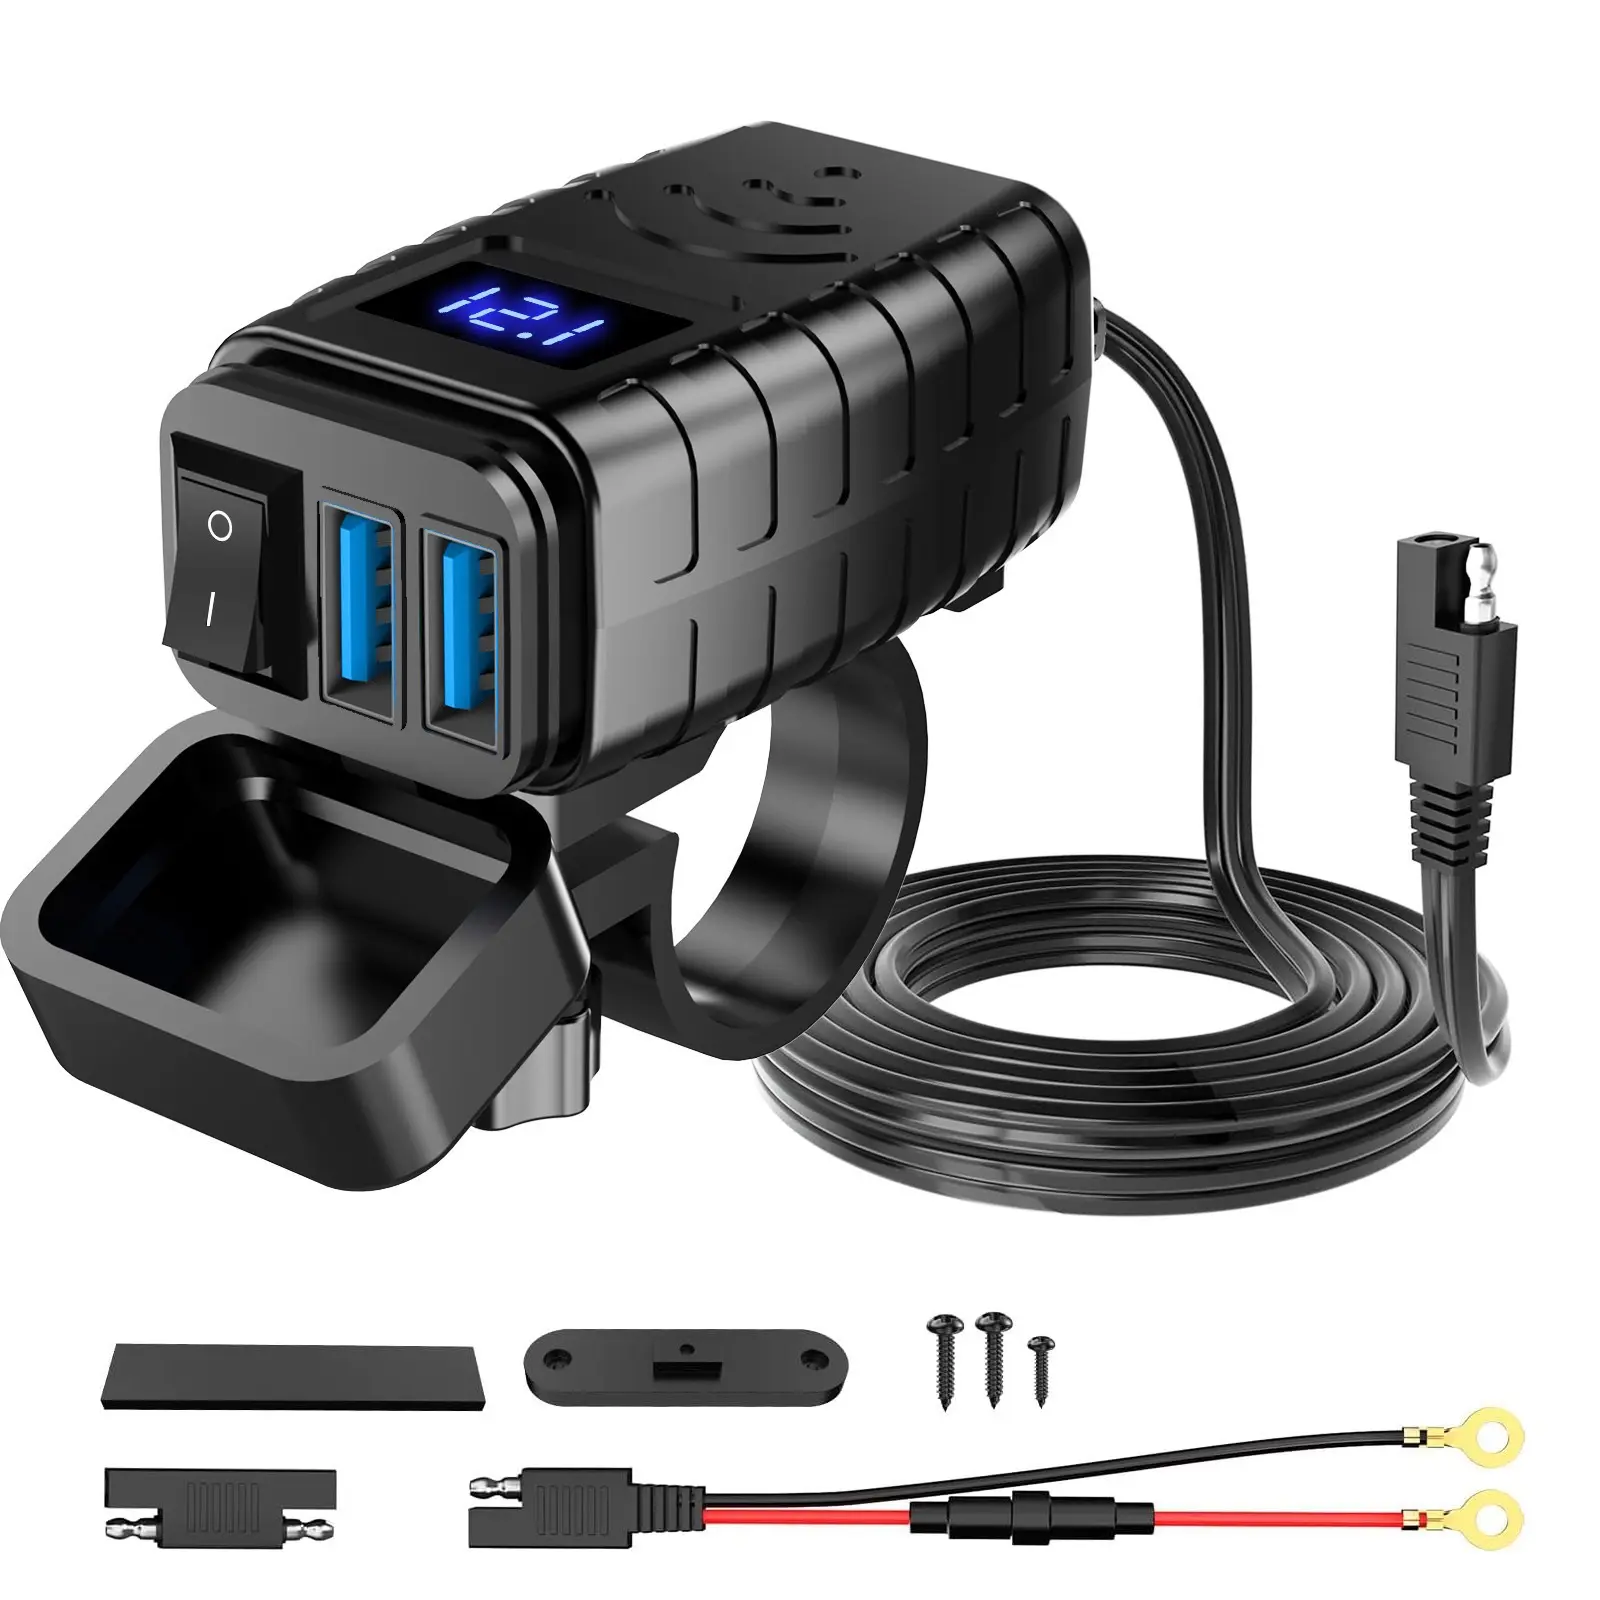 Factory OEM Motorbike Phone Charger SAE Socket 12V QC3.0 Motorcycle Waterproof Dual Usb Charger With Voltmeter Display